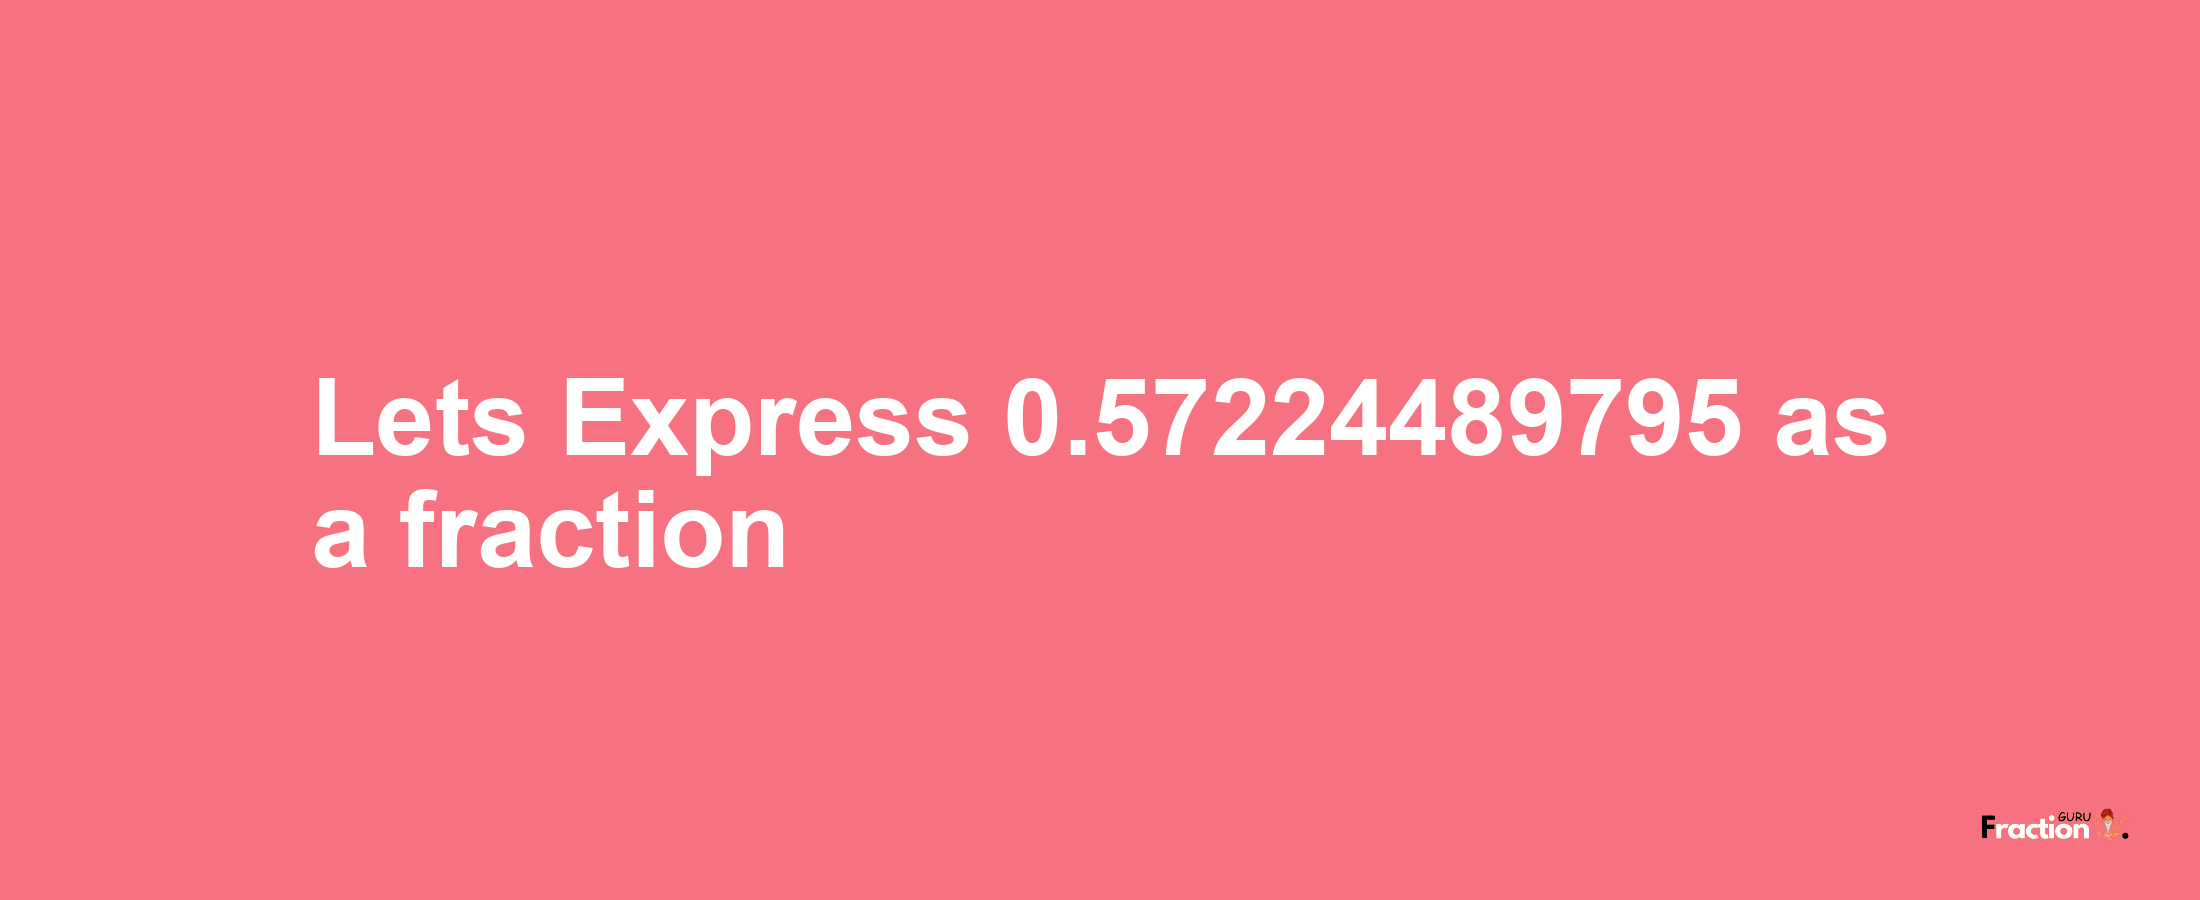 Lets Express 0.57224489795 as afraction